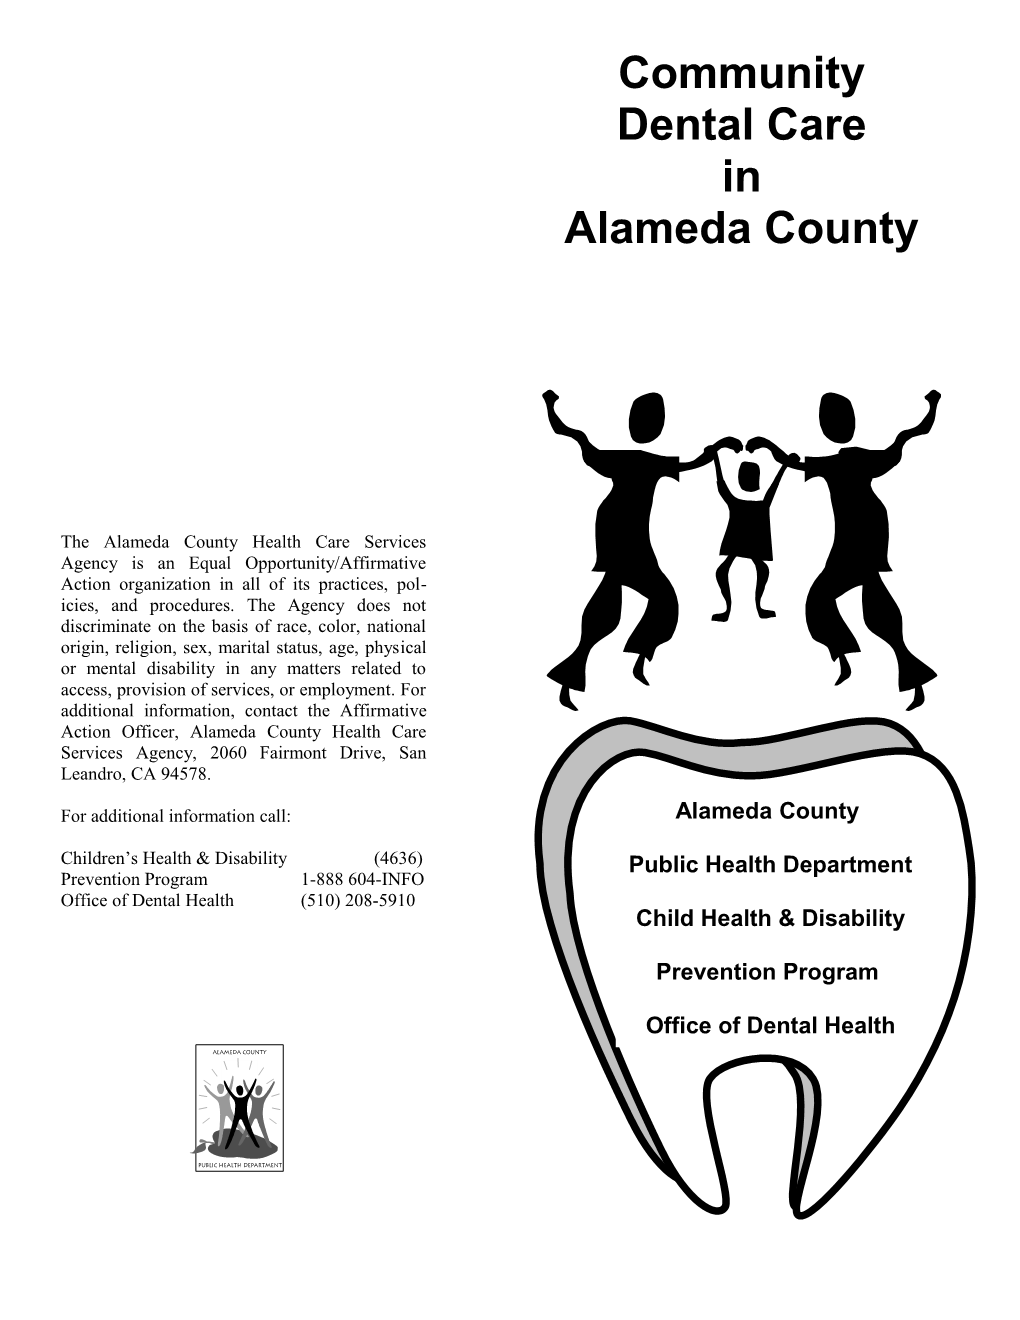 The Alameda County Health Care Services Agency Is an Equal Opportunity/Affirmative Action